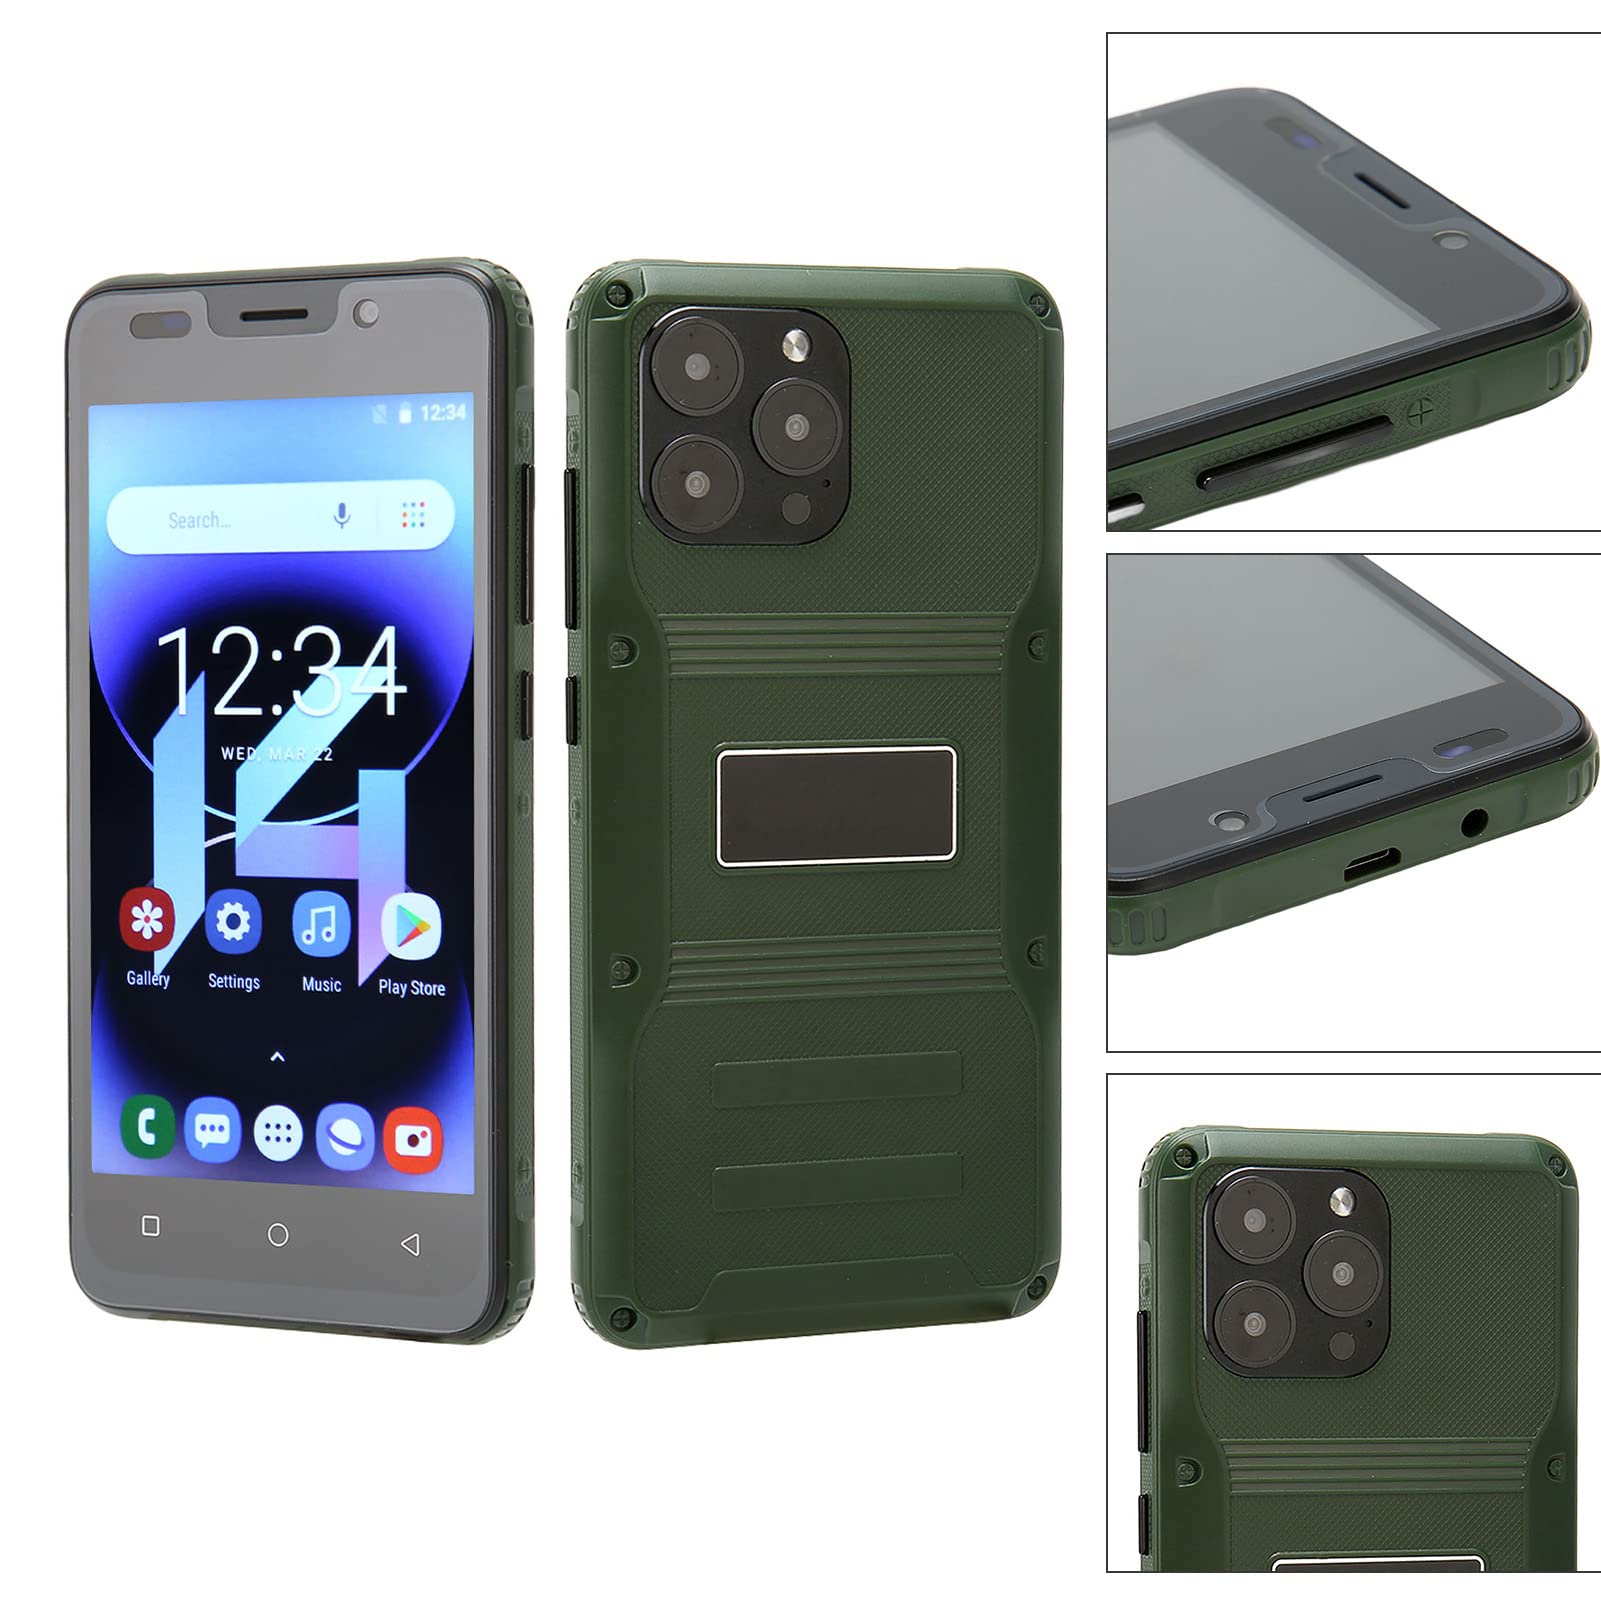 5 Inch Unlocked Phone for Android 10 Systemm, 4GB + 32GB, Dual Sim, Face Unlock, IP65 Waterproof and Dustproof, 3G Smartphone Support 2.4G WIFI, 5MP+ 8MP (Green)